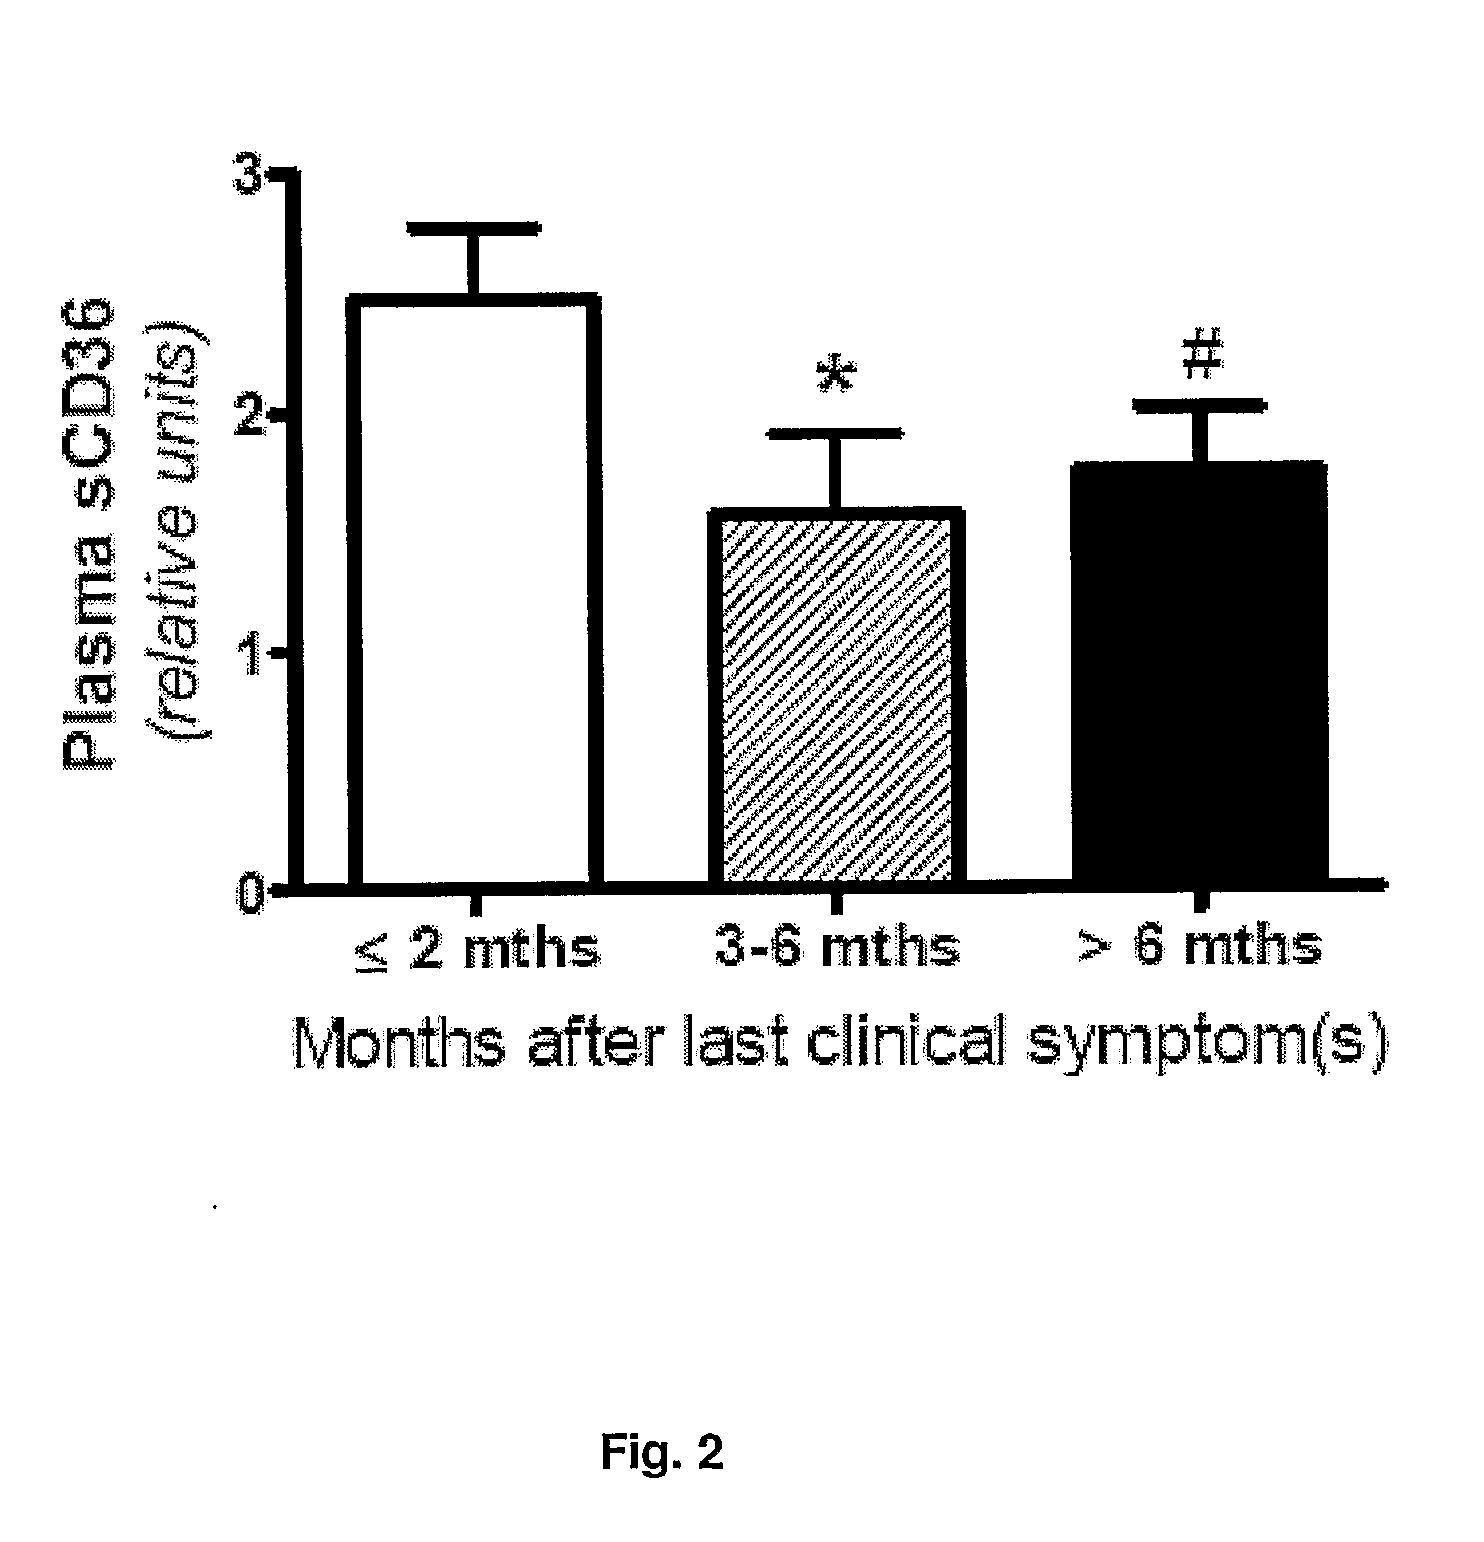 Method for diagnosing atherosclerotic plaques by measurement of cd36